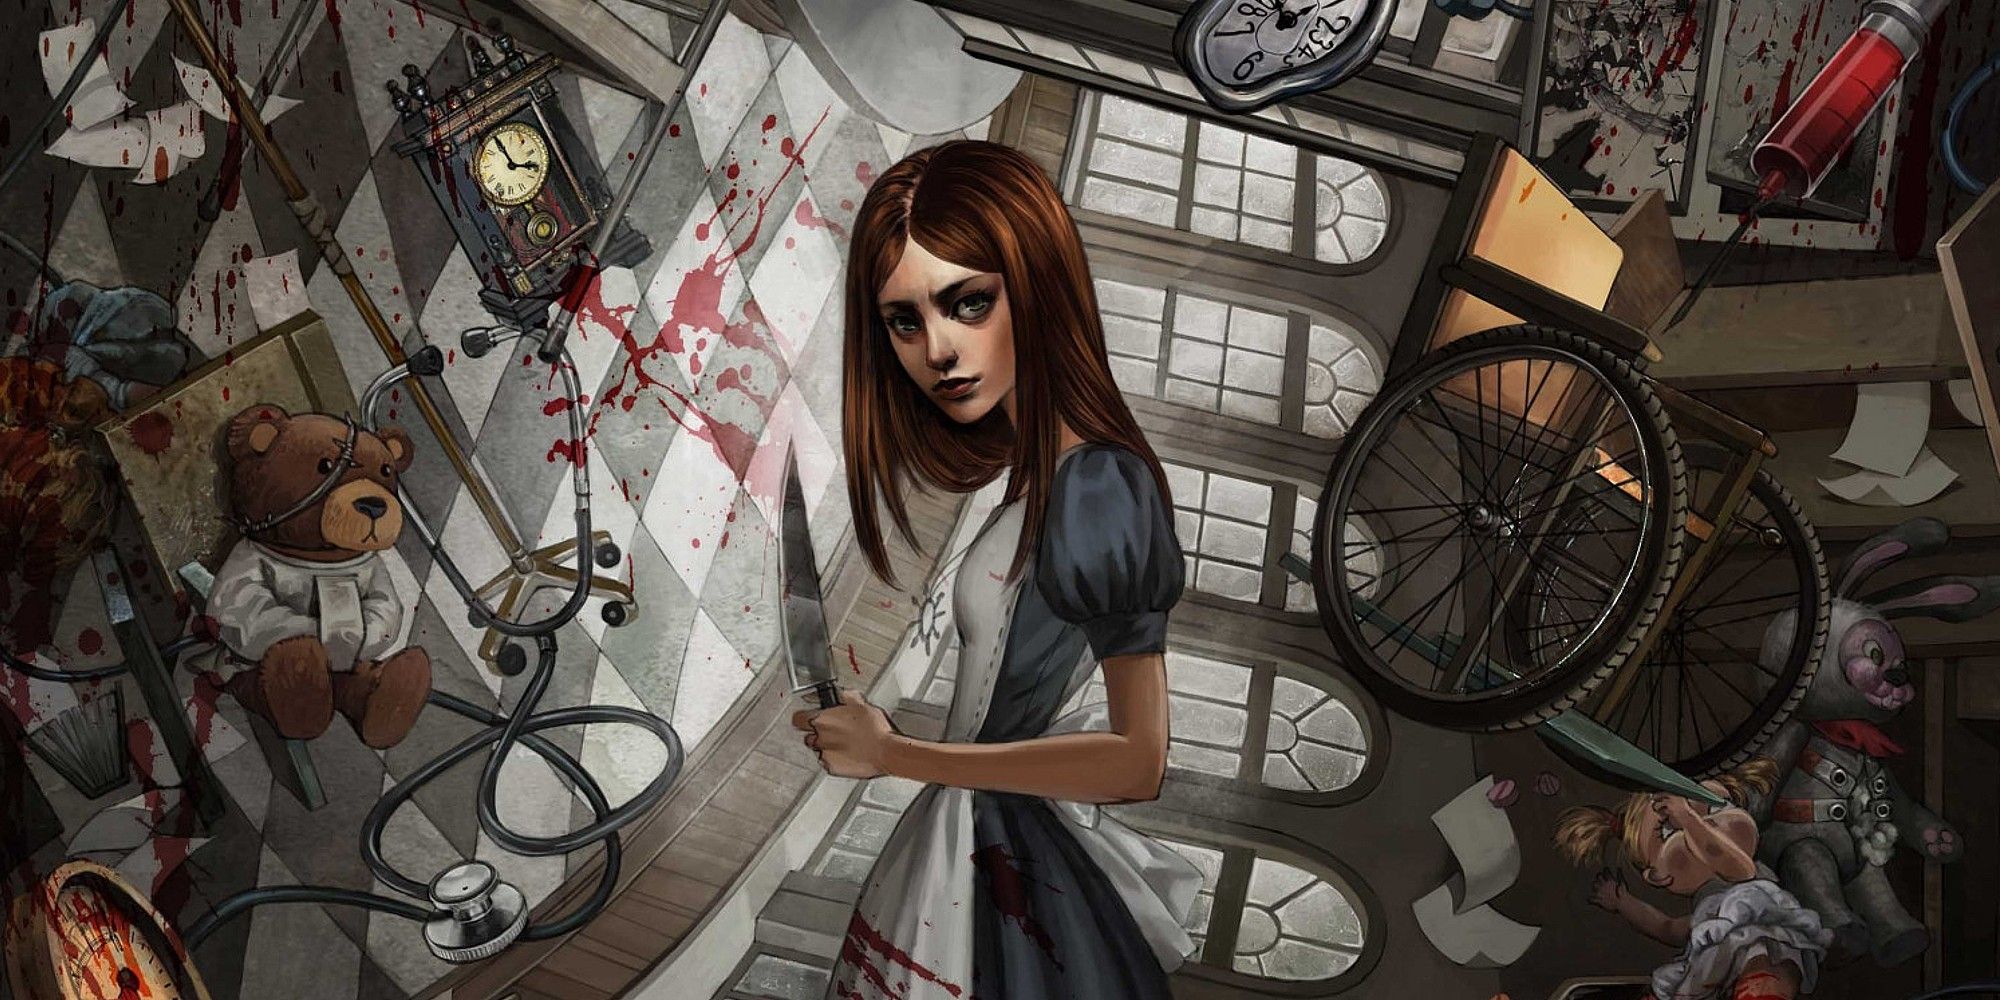 EA Rejects American McGee’s Alice: Asylum And Refuses To Sell License